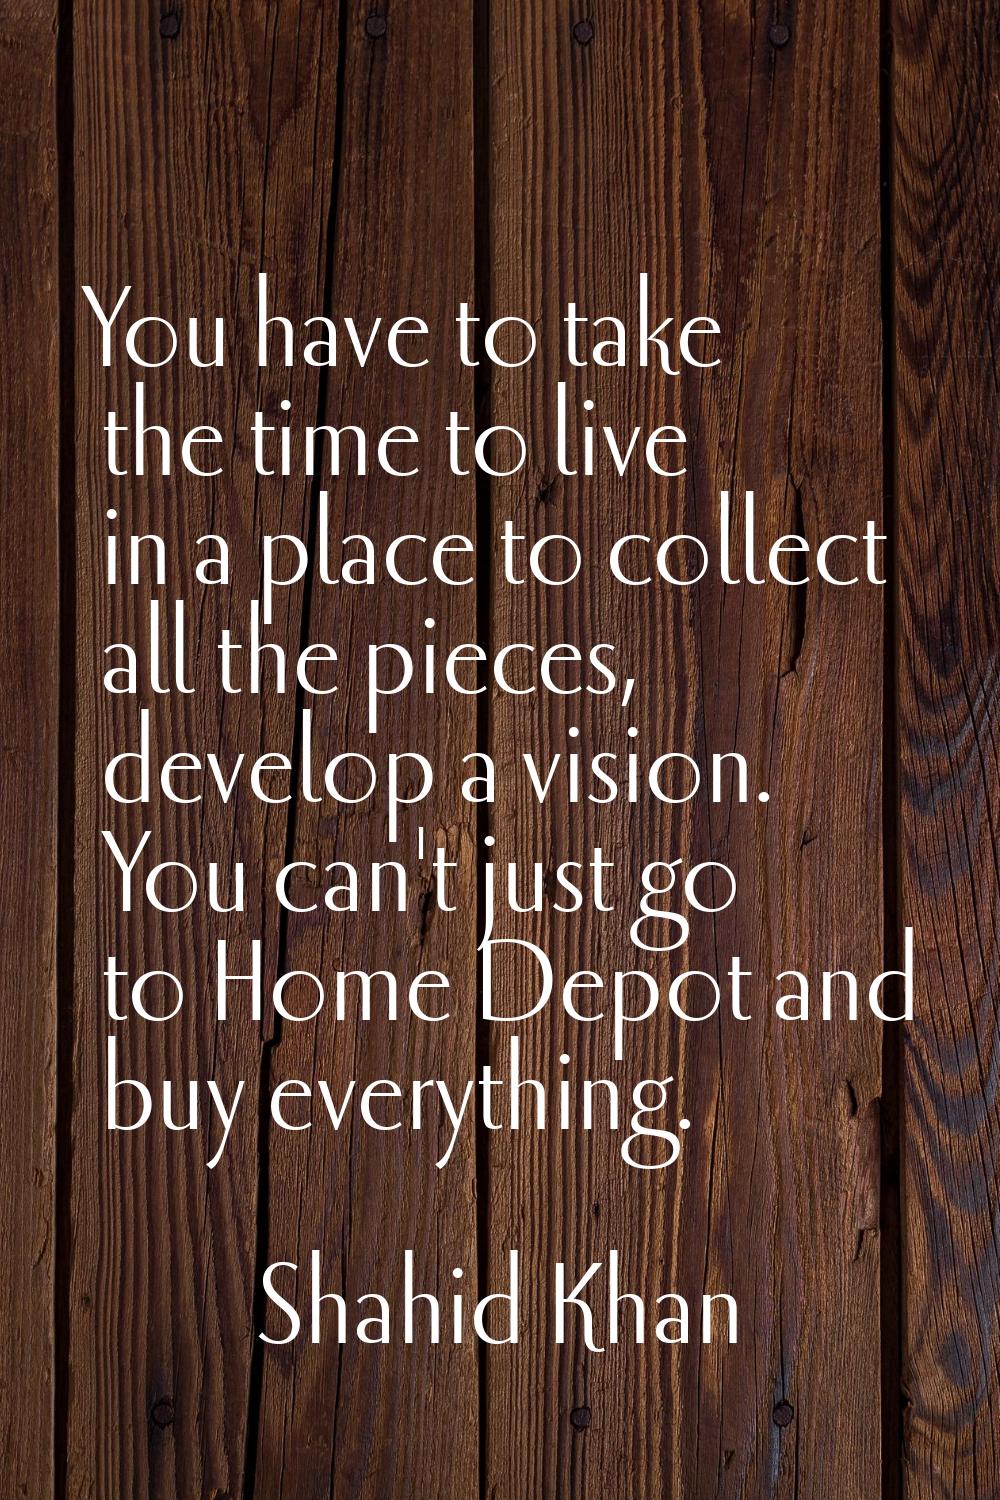 You have to take the time to live in a place to collect all the pieces, develop a vision. You can't